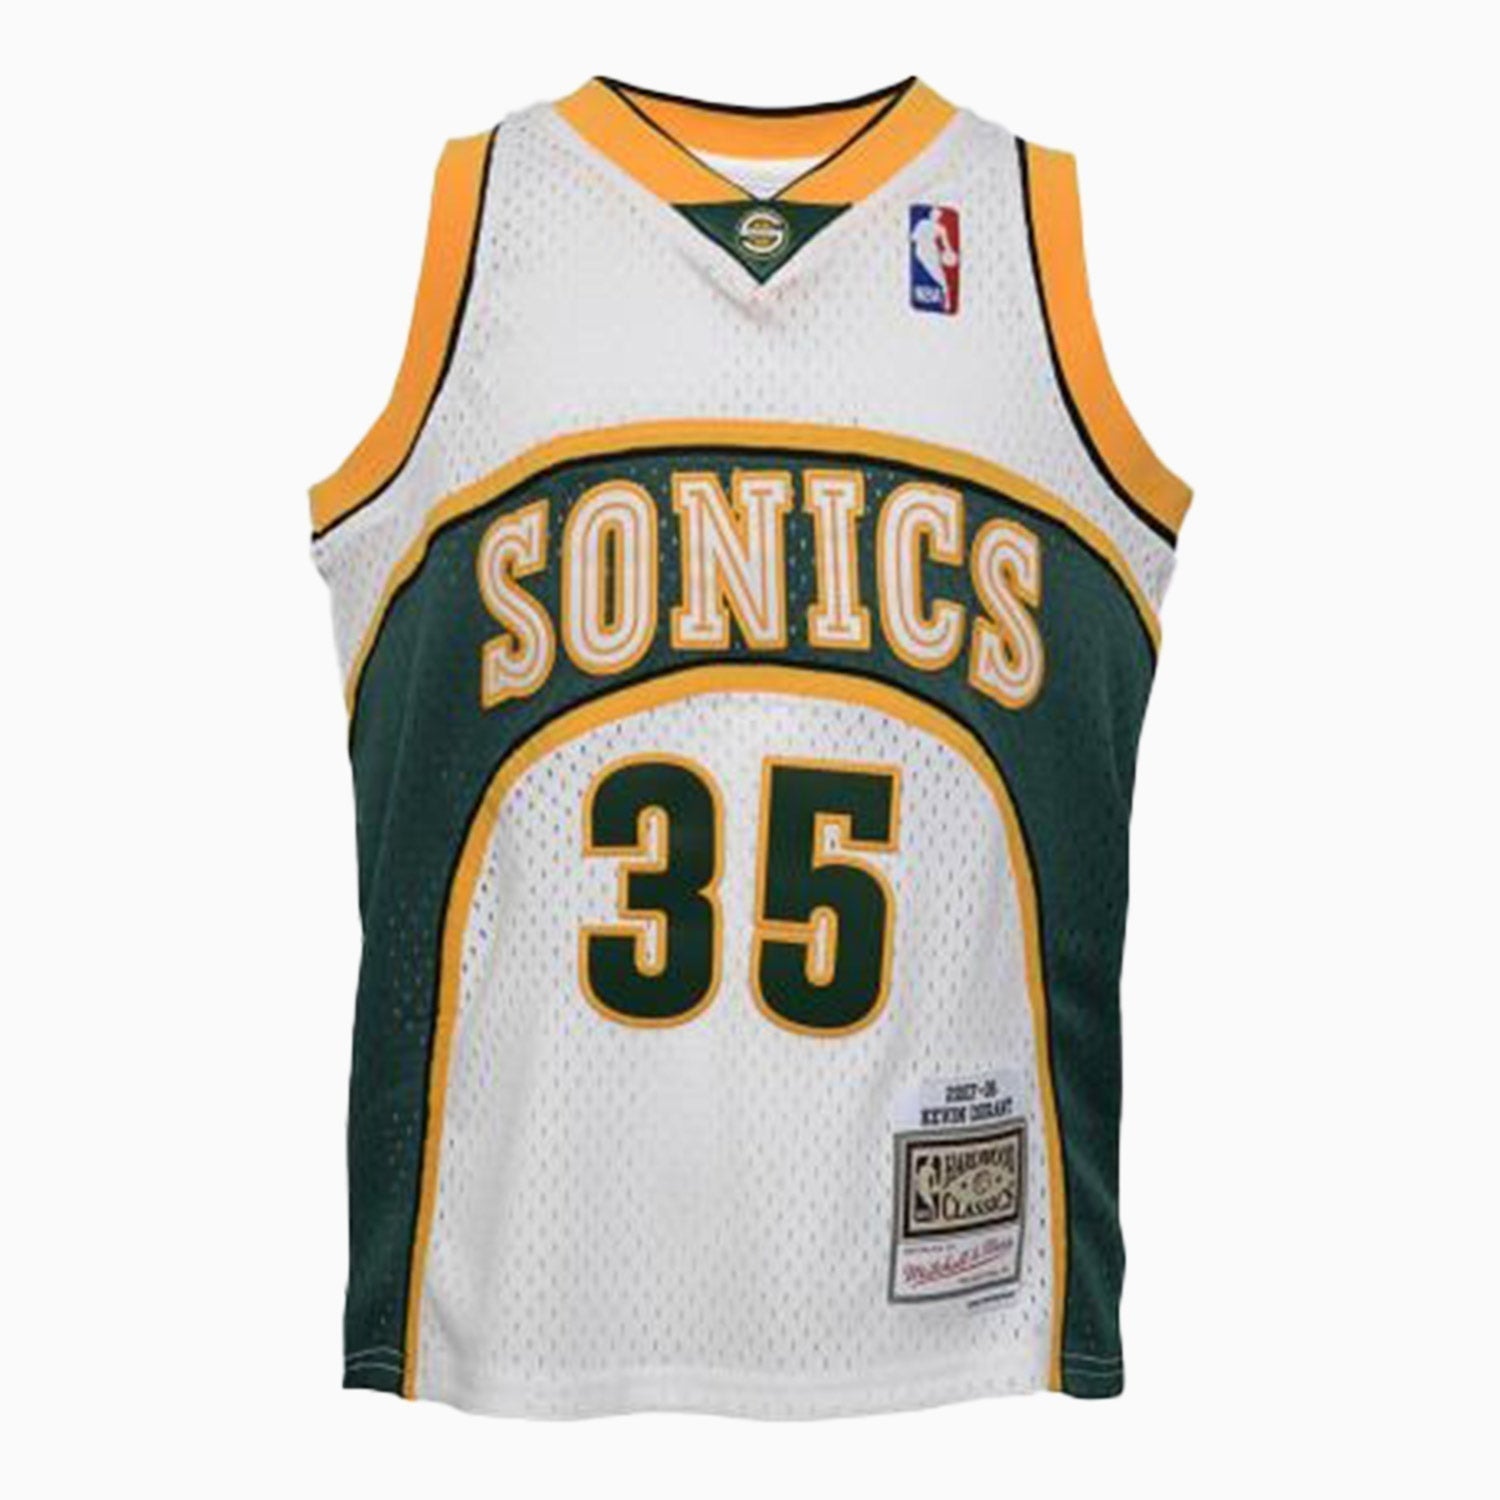 mitchell-and-ness-swingman-kevin-durant-seattle-supersonics-nba-2007-08-jersey-youth-9n2b7bhm0-sonkd-y07